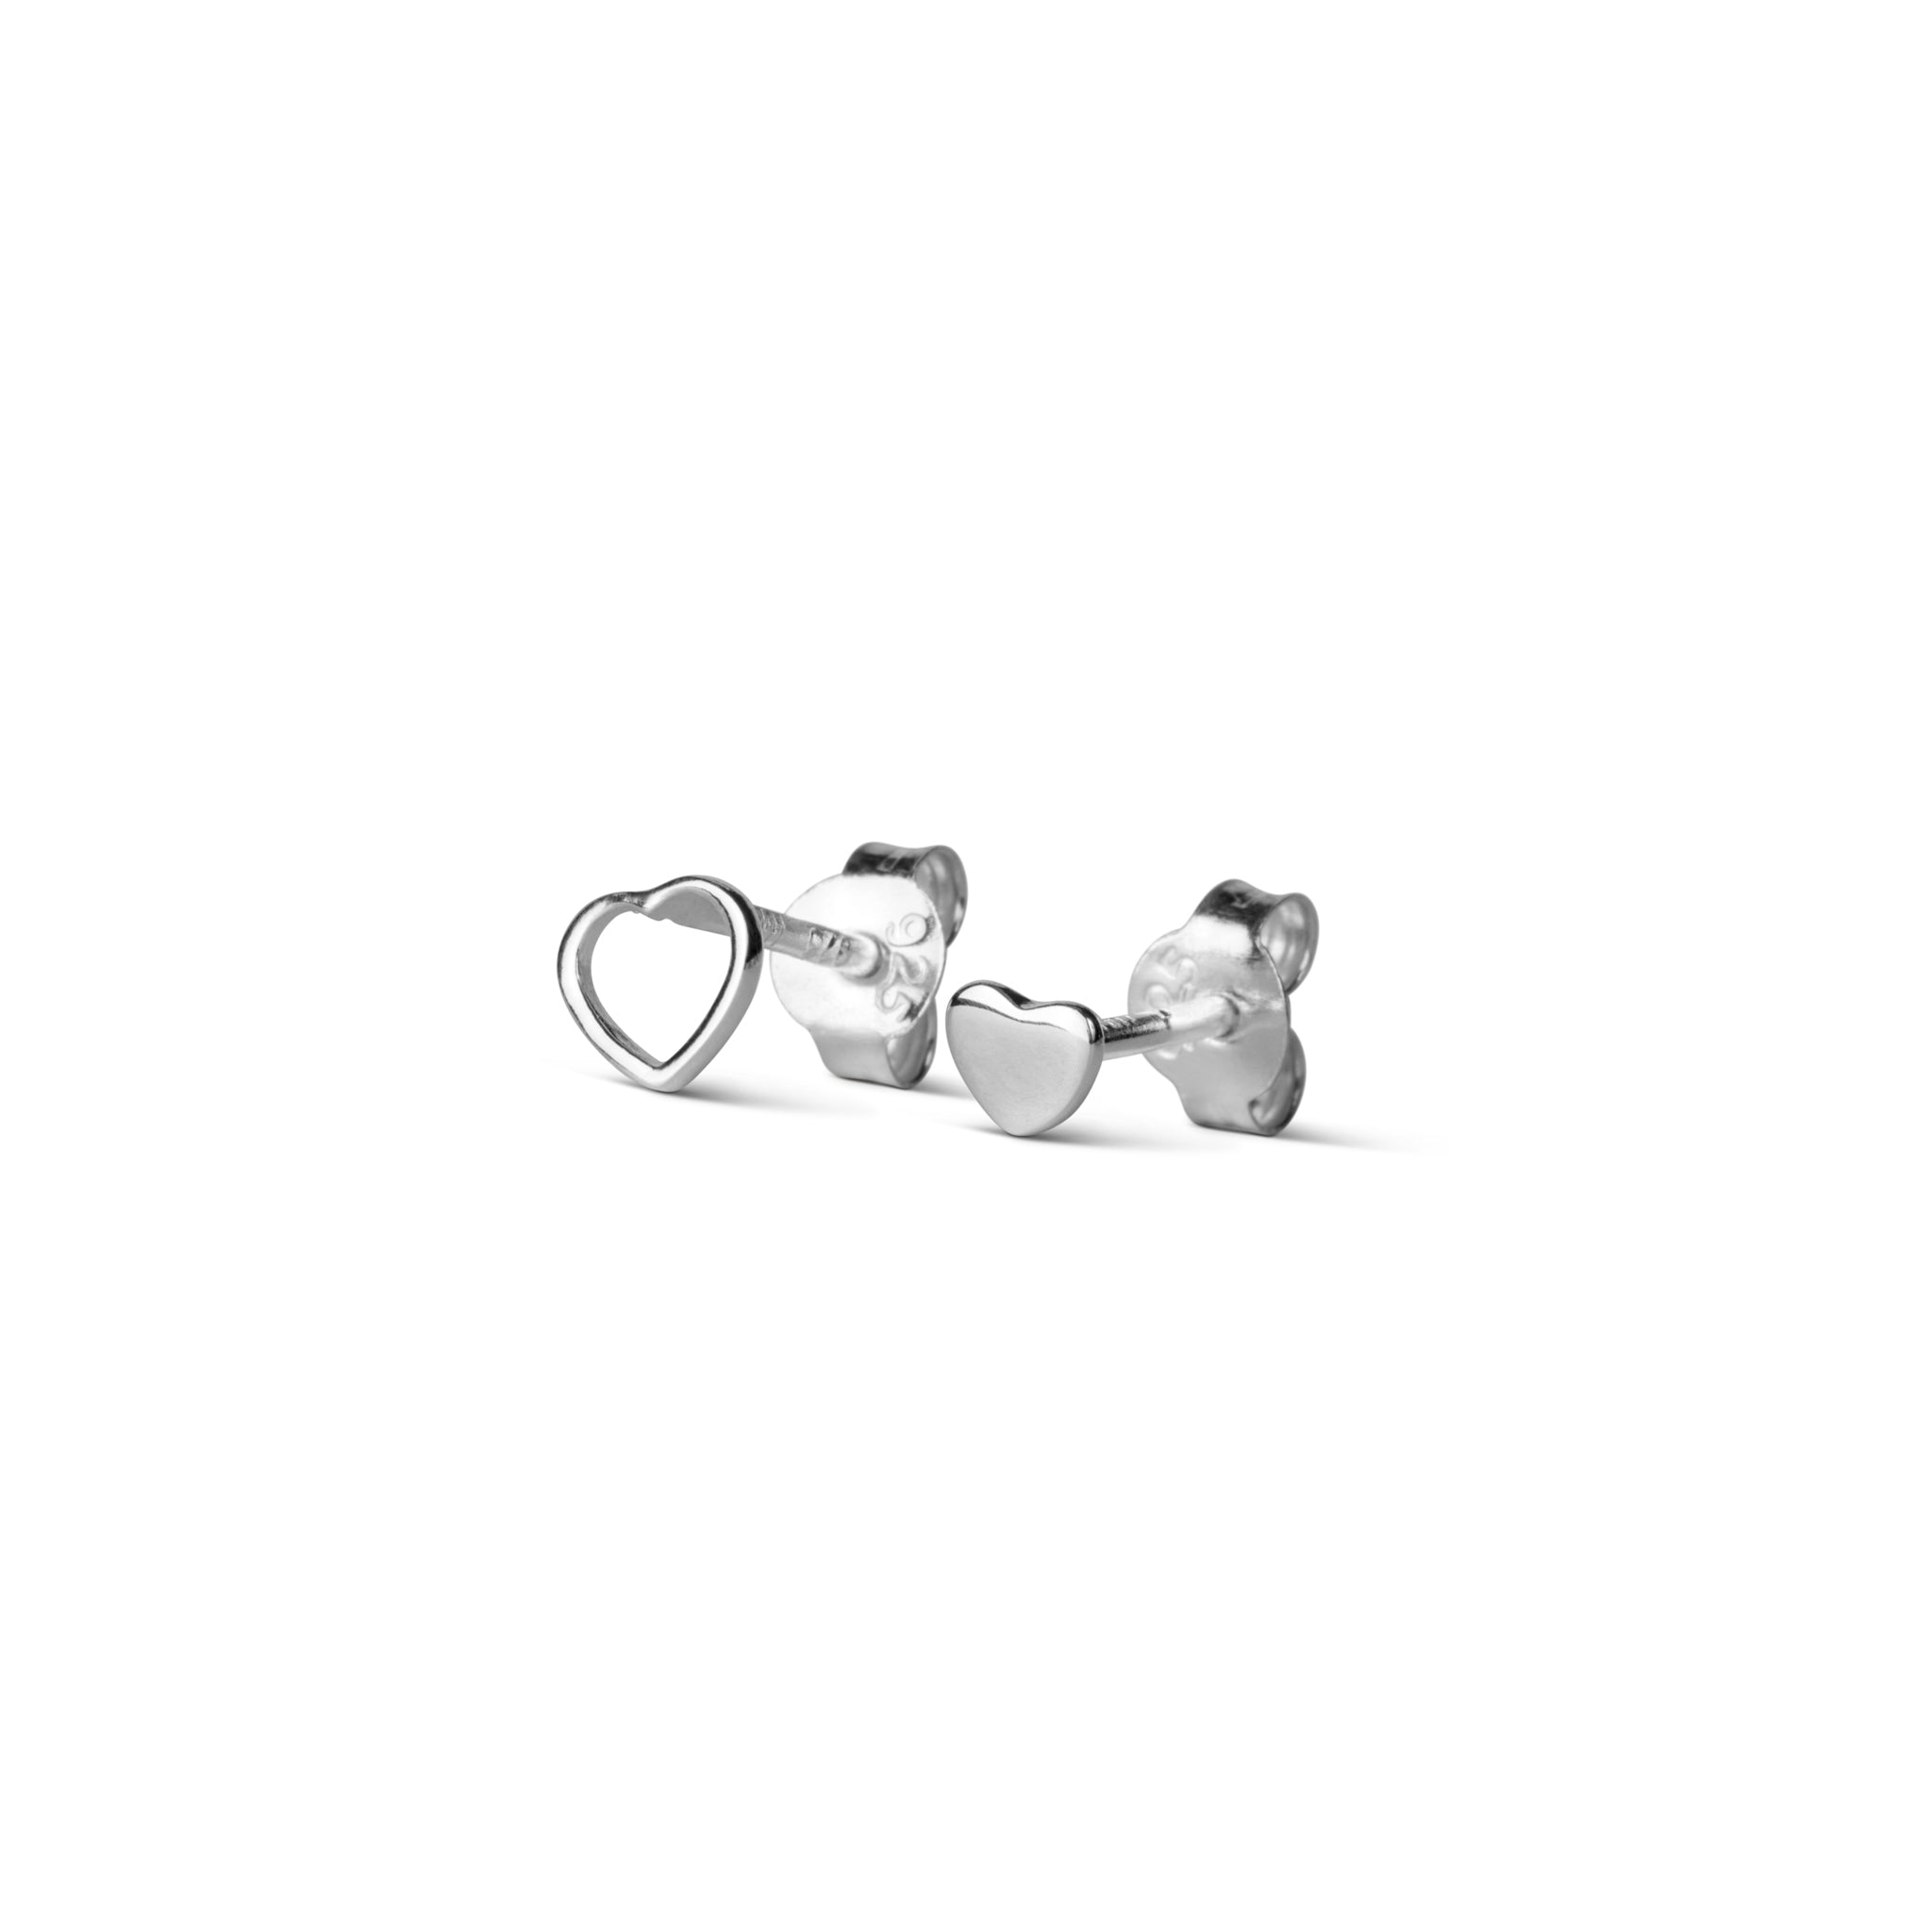 A pair of shiny silver "Family Love Earring Pair - Silver" earrings by Lulu Copenhagen on a white background.